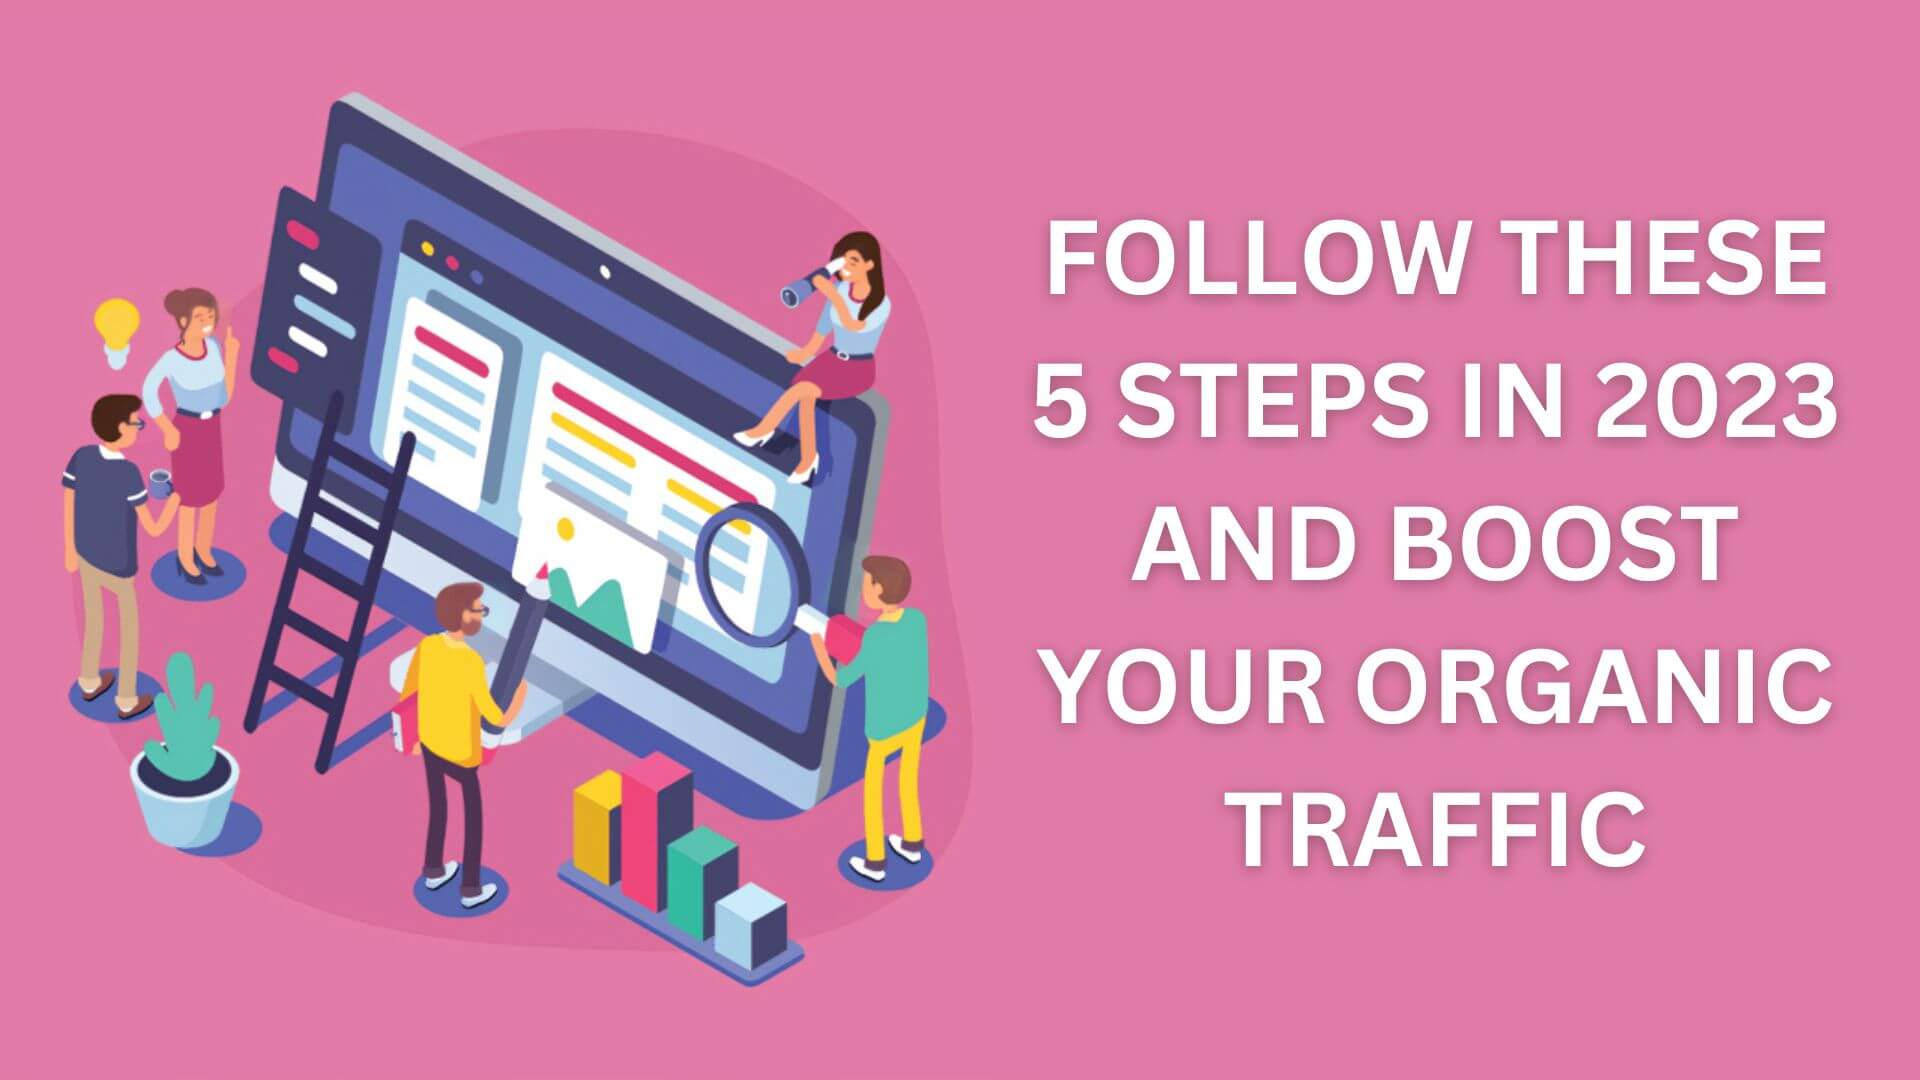 Boost Organic Traffic by Following These 5 Steps in 2023